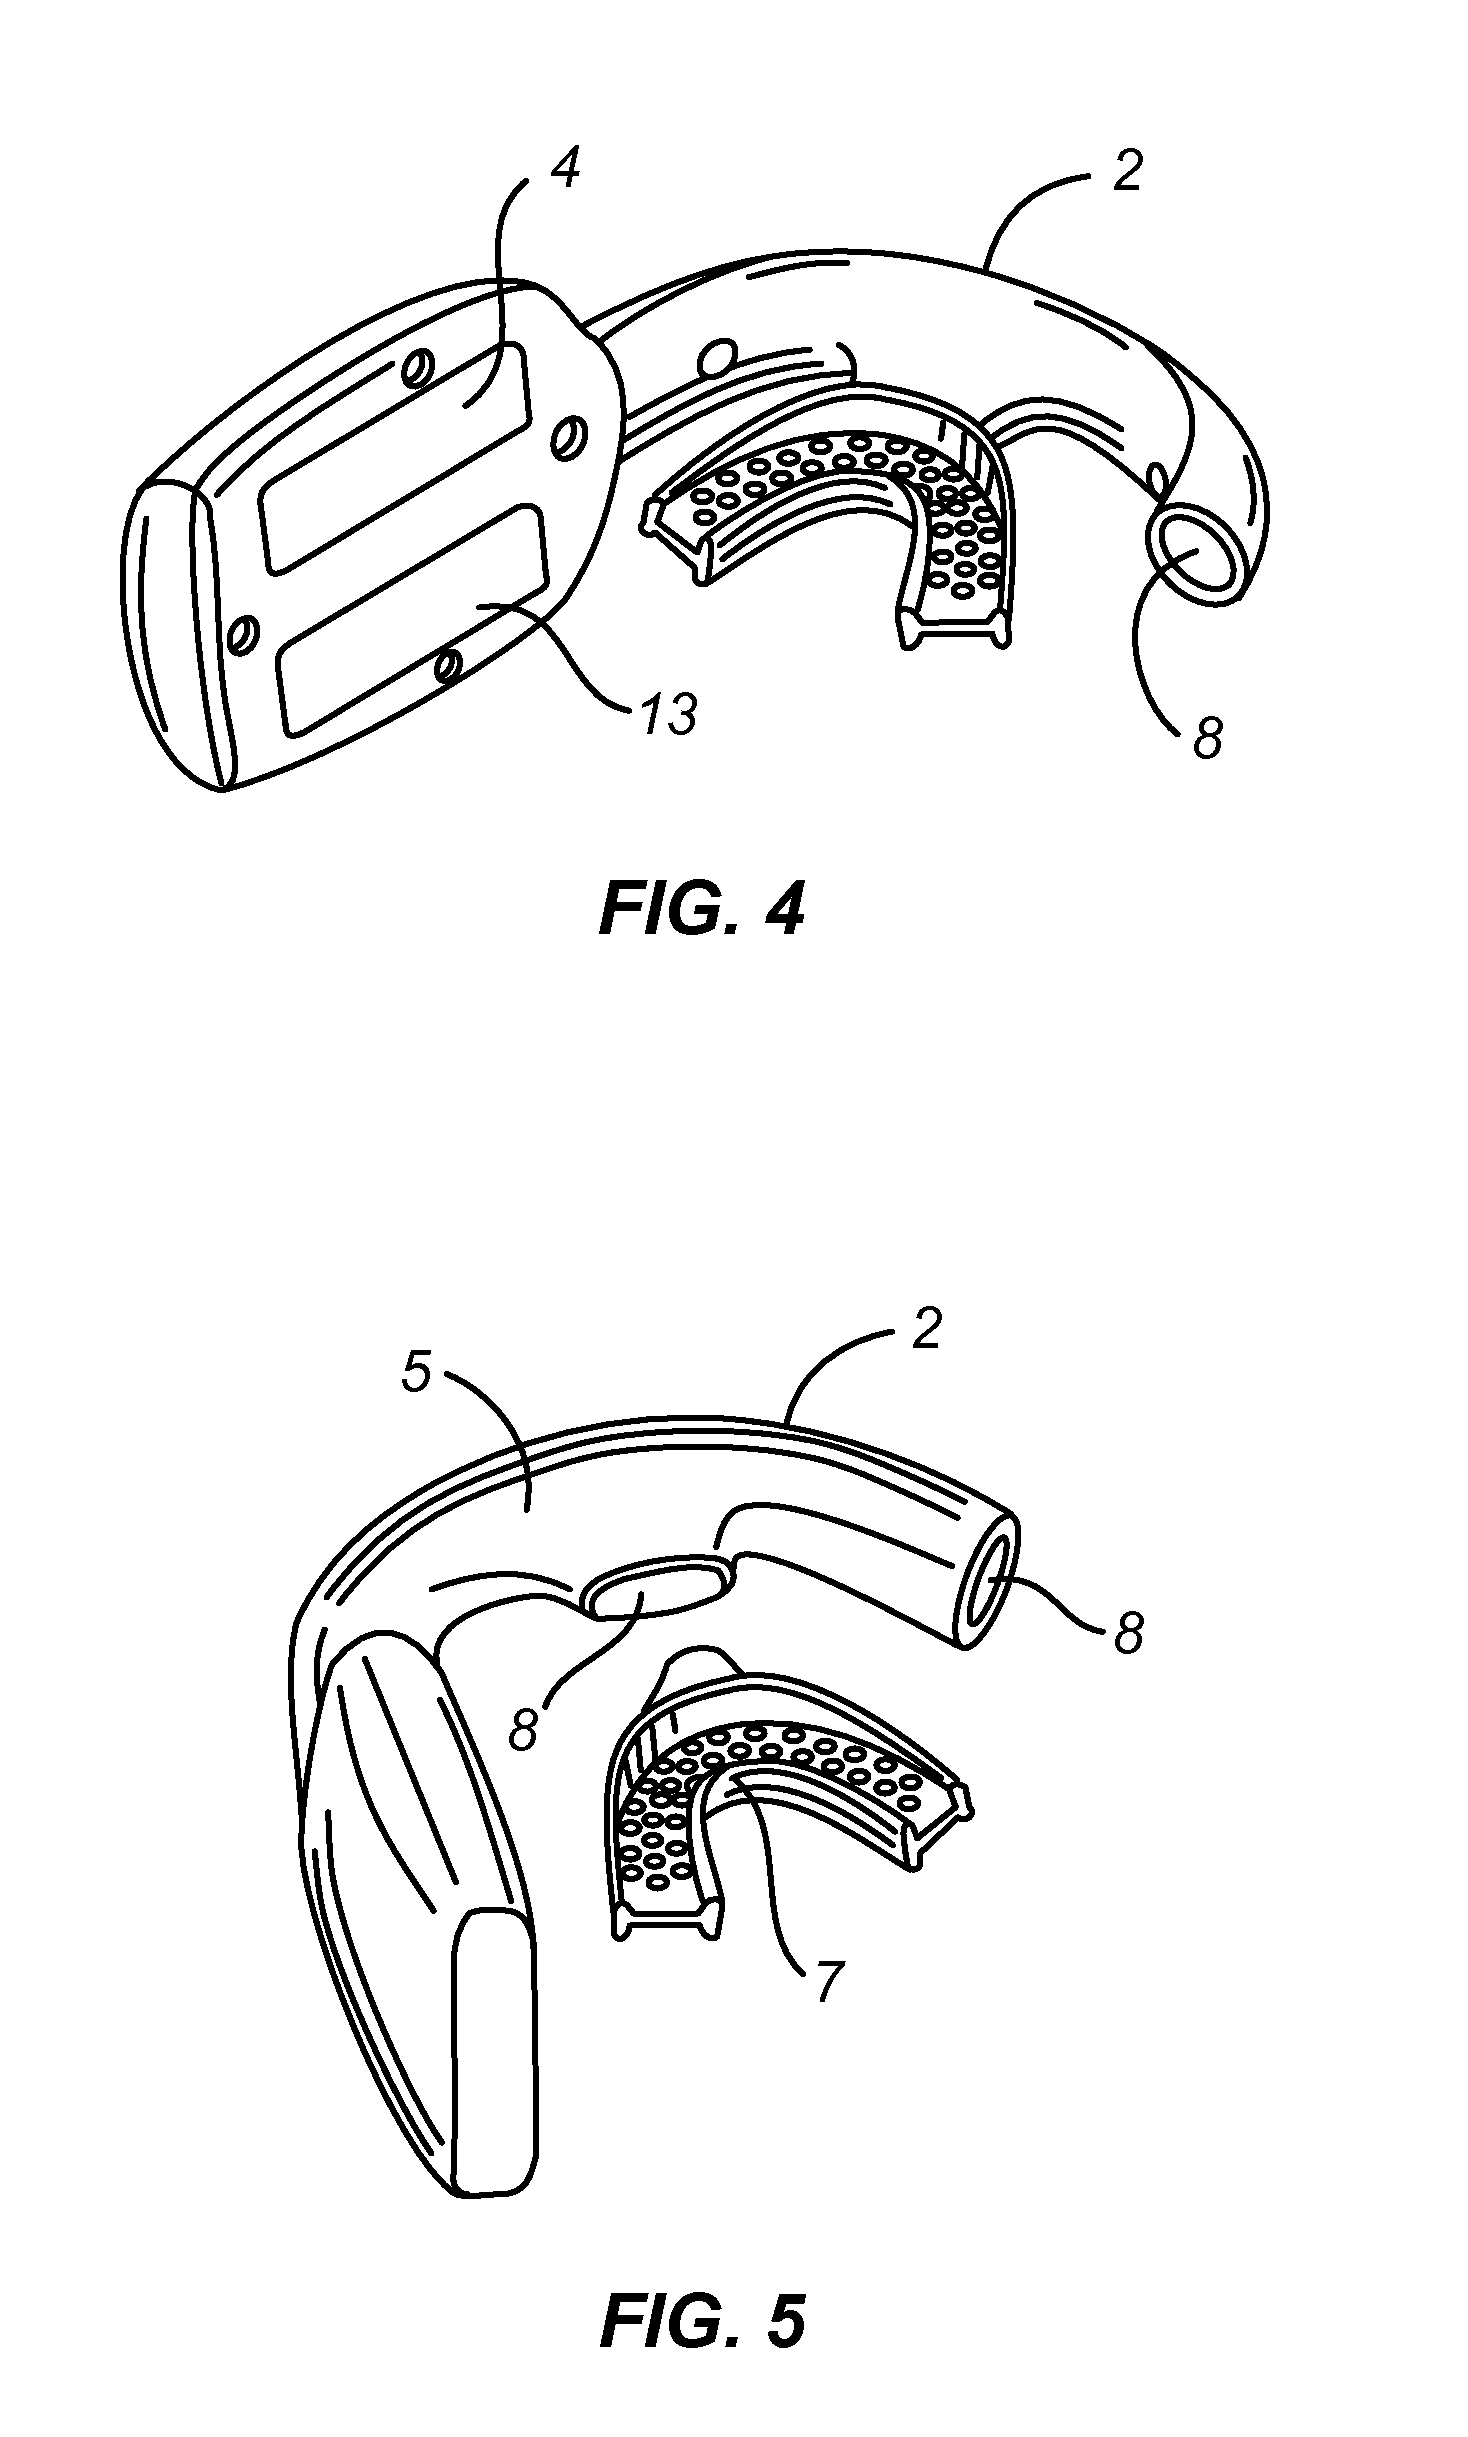 Methods for treatment of bone disorders and biostimulation of bone and soft tissue